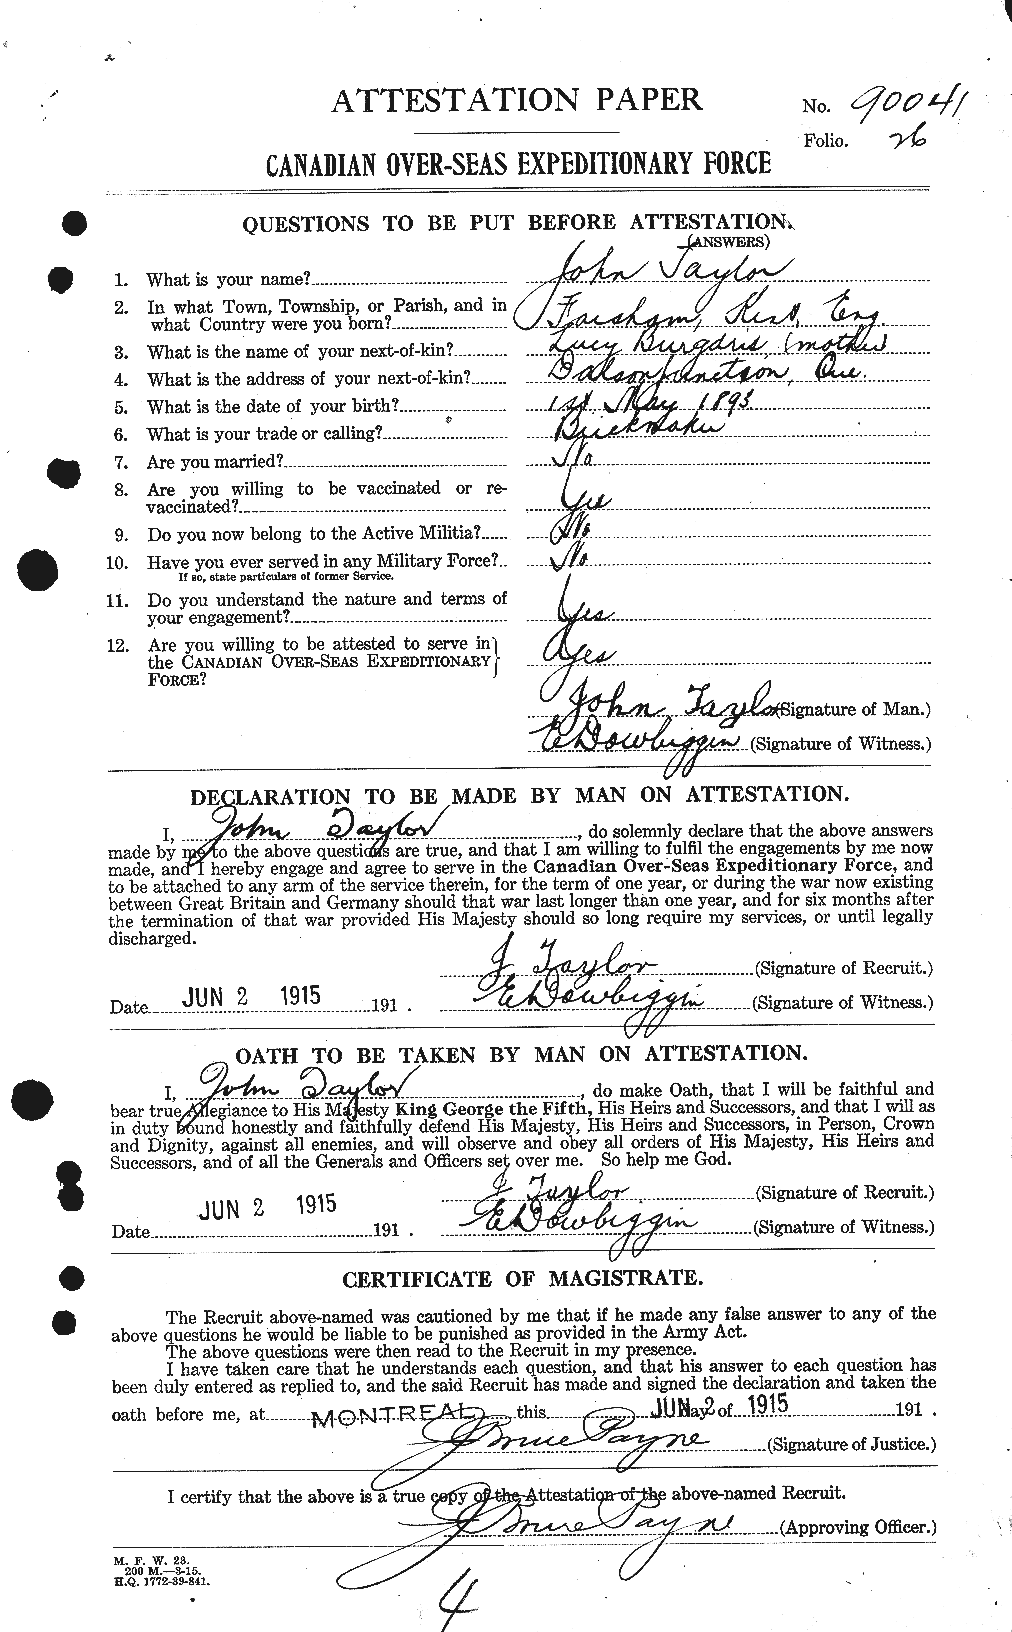 Personnel Records of the First World War - CEF 627023a